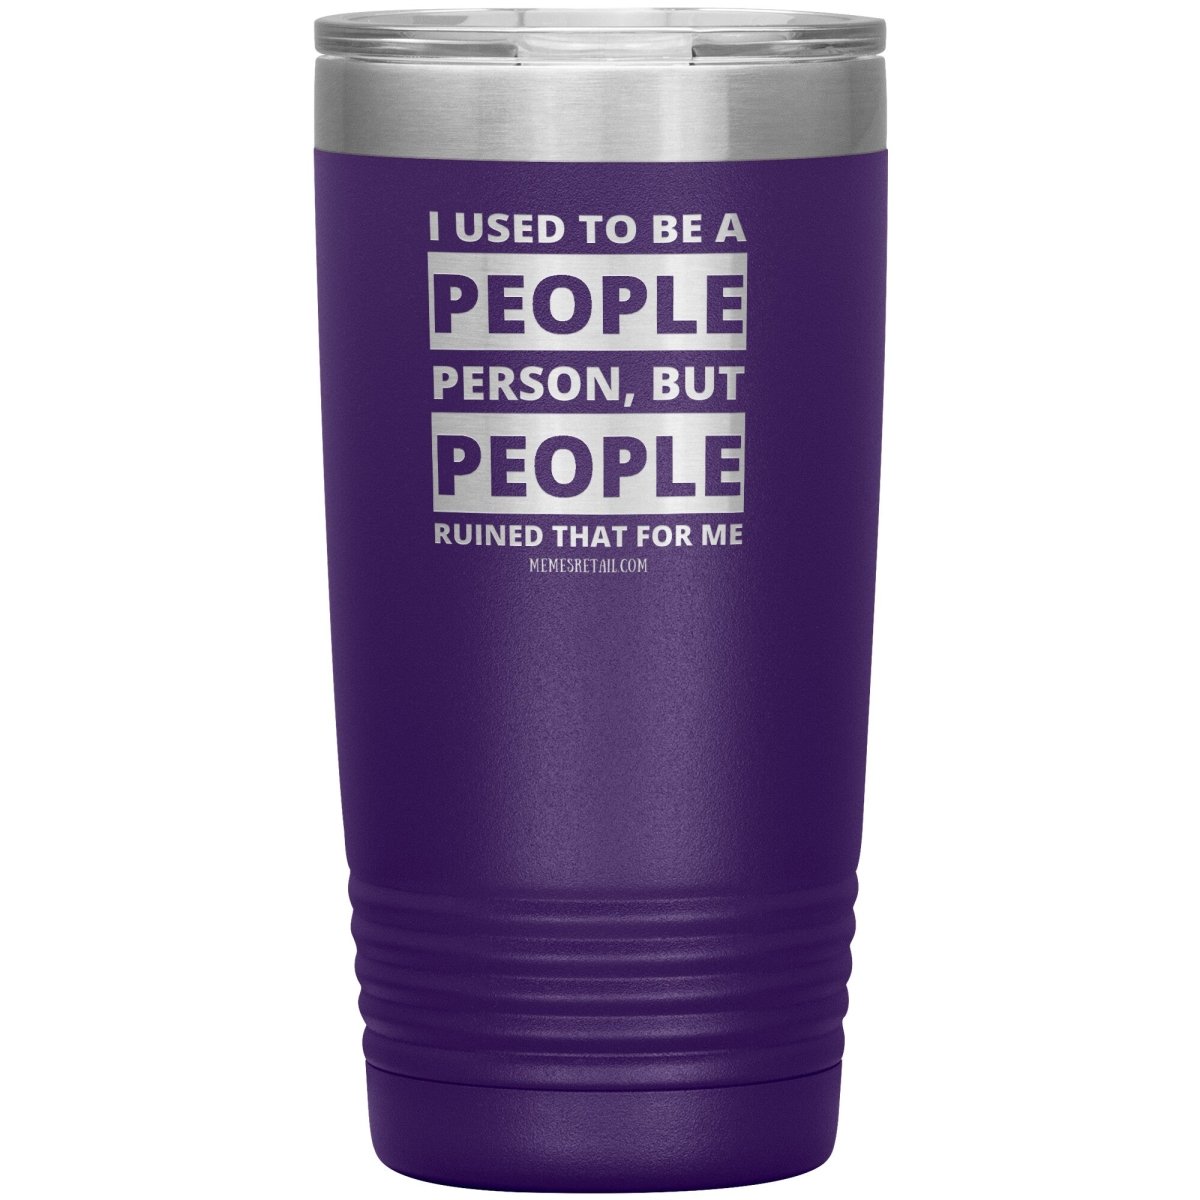 I Used To Be A People Person, But People Ruined That For Me Tumblers, 20oz Insulated Tumbler / Purple - MemesRetail.com